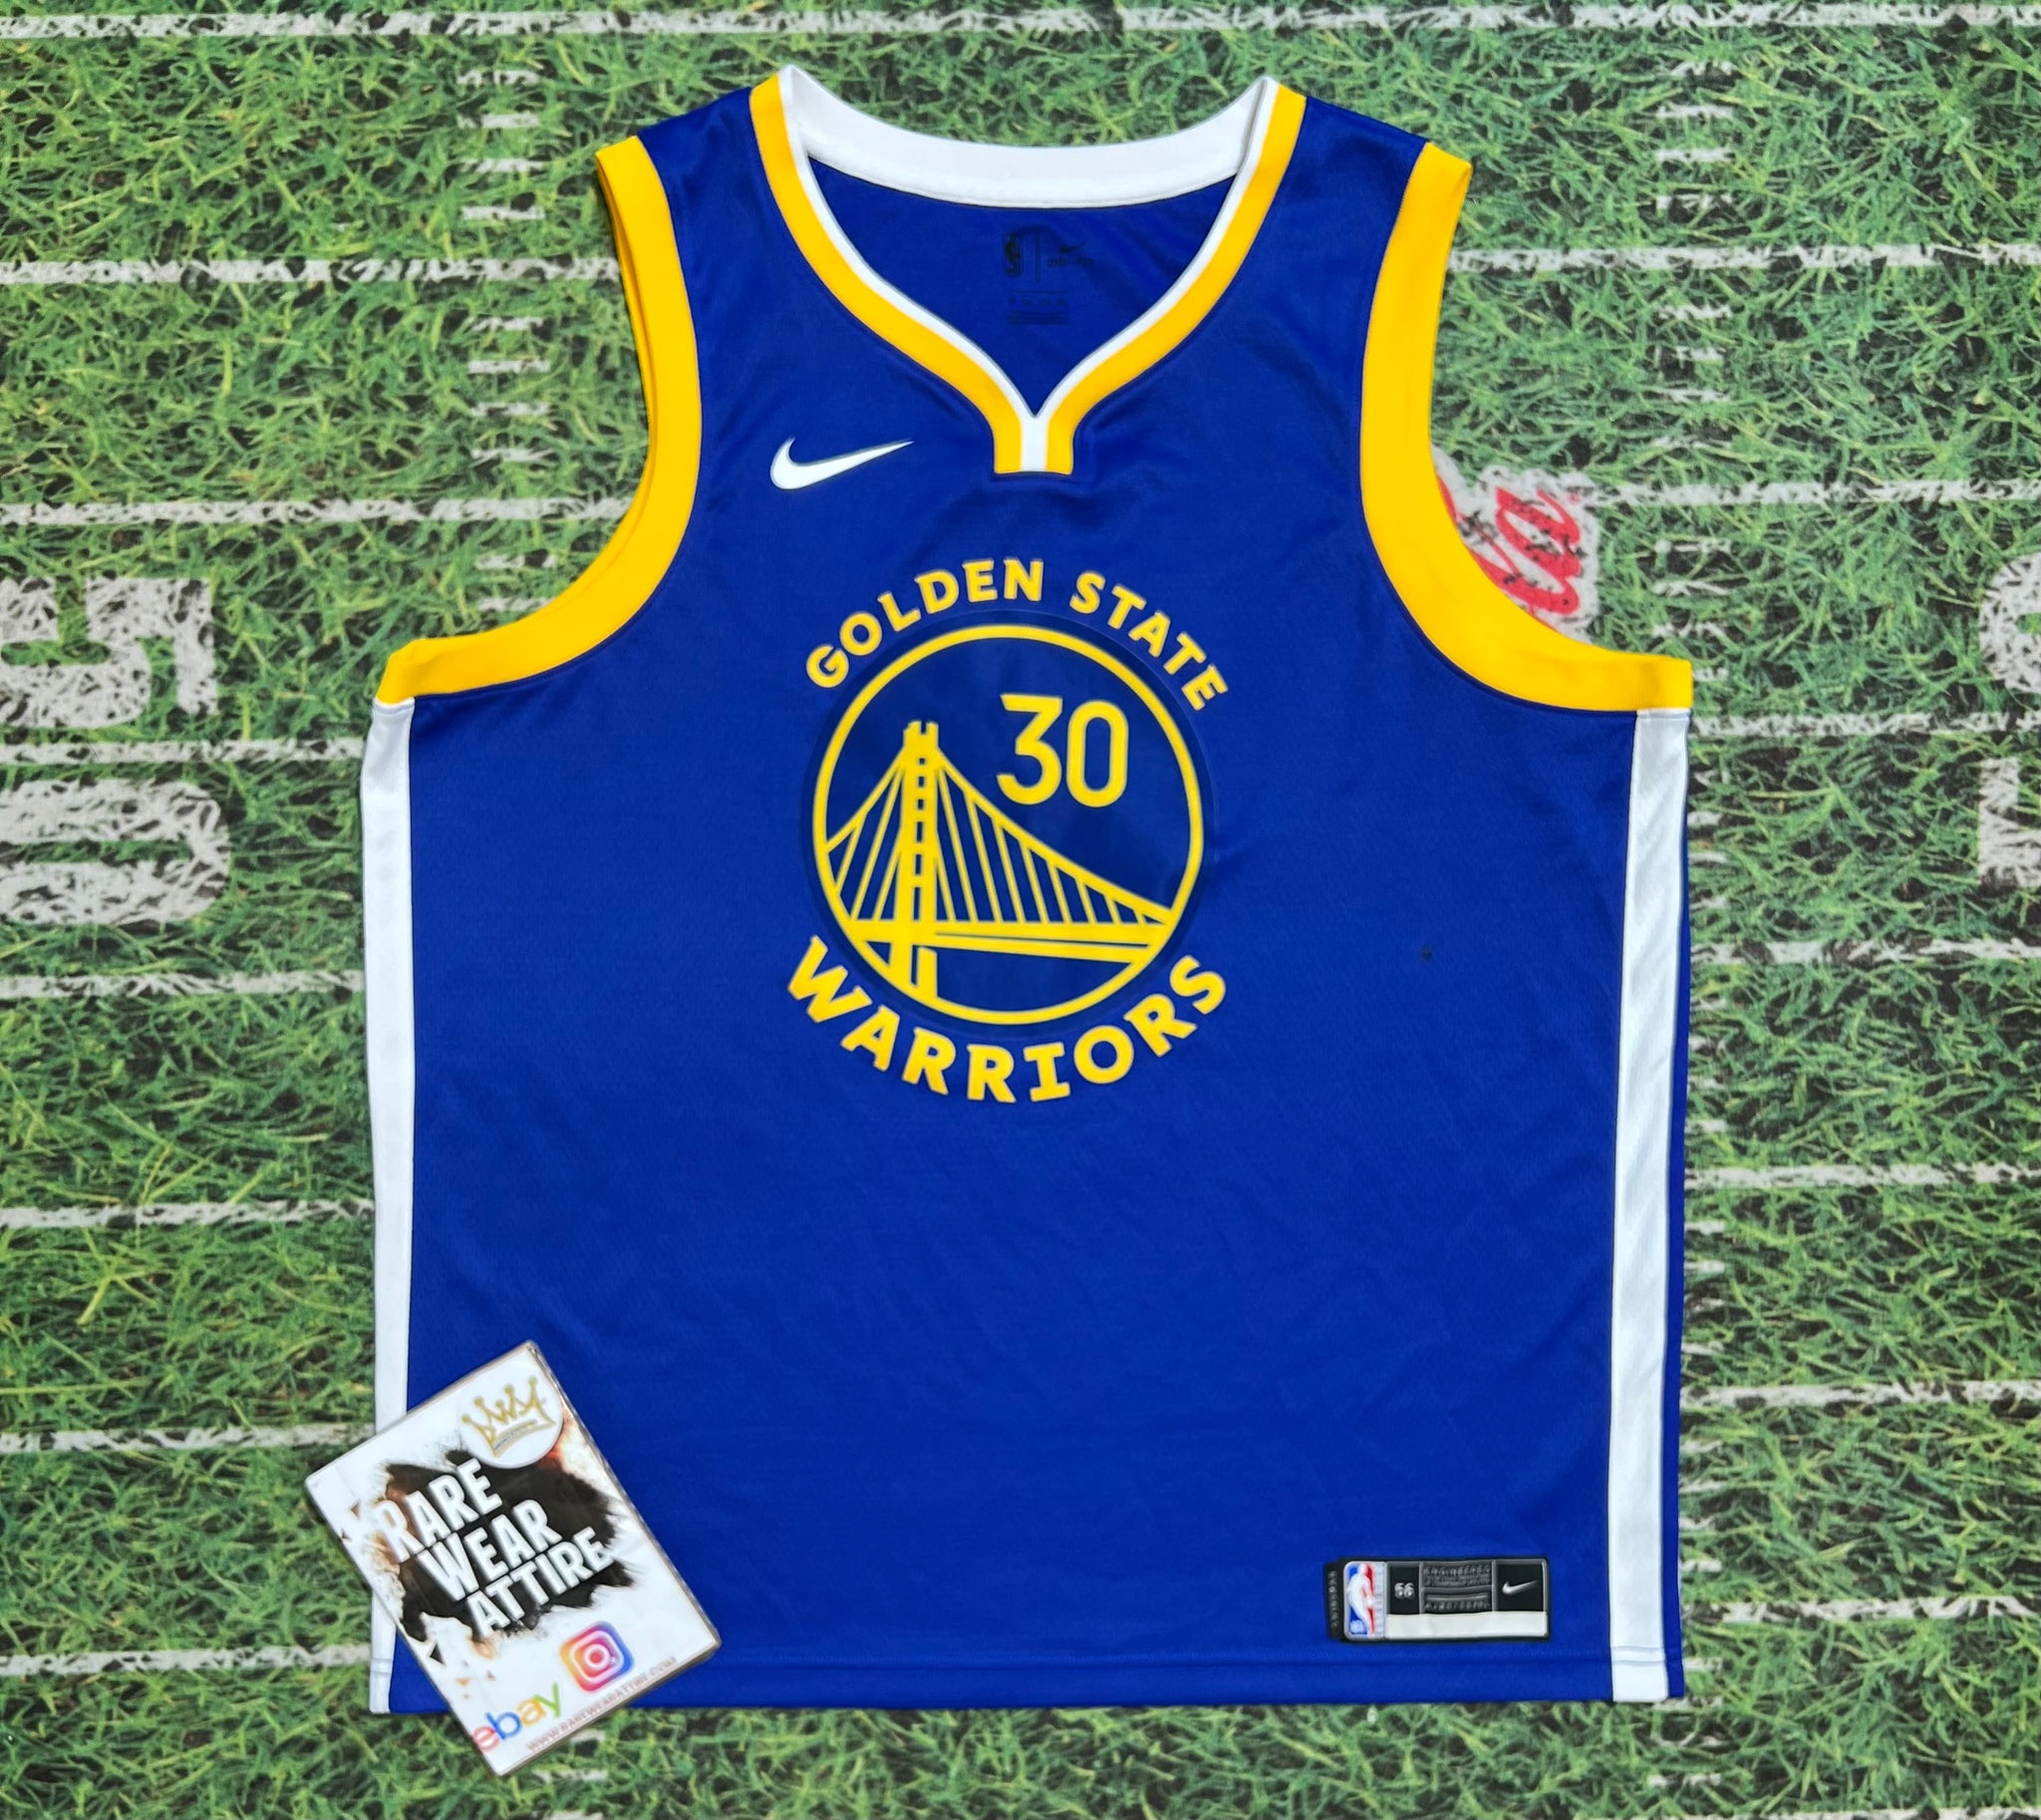 Golden State Warriors Nike Icon Authentic Jersey - Stephen Curry